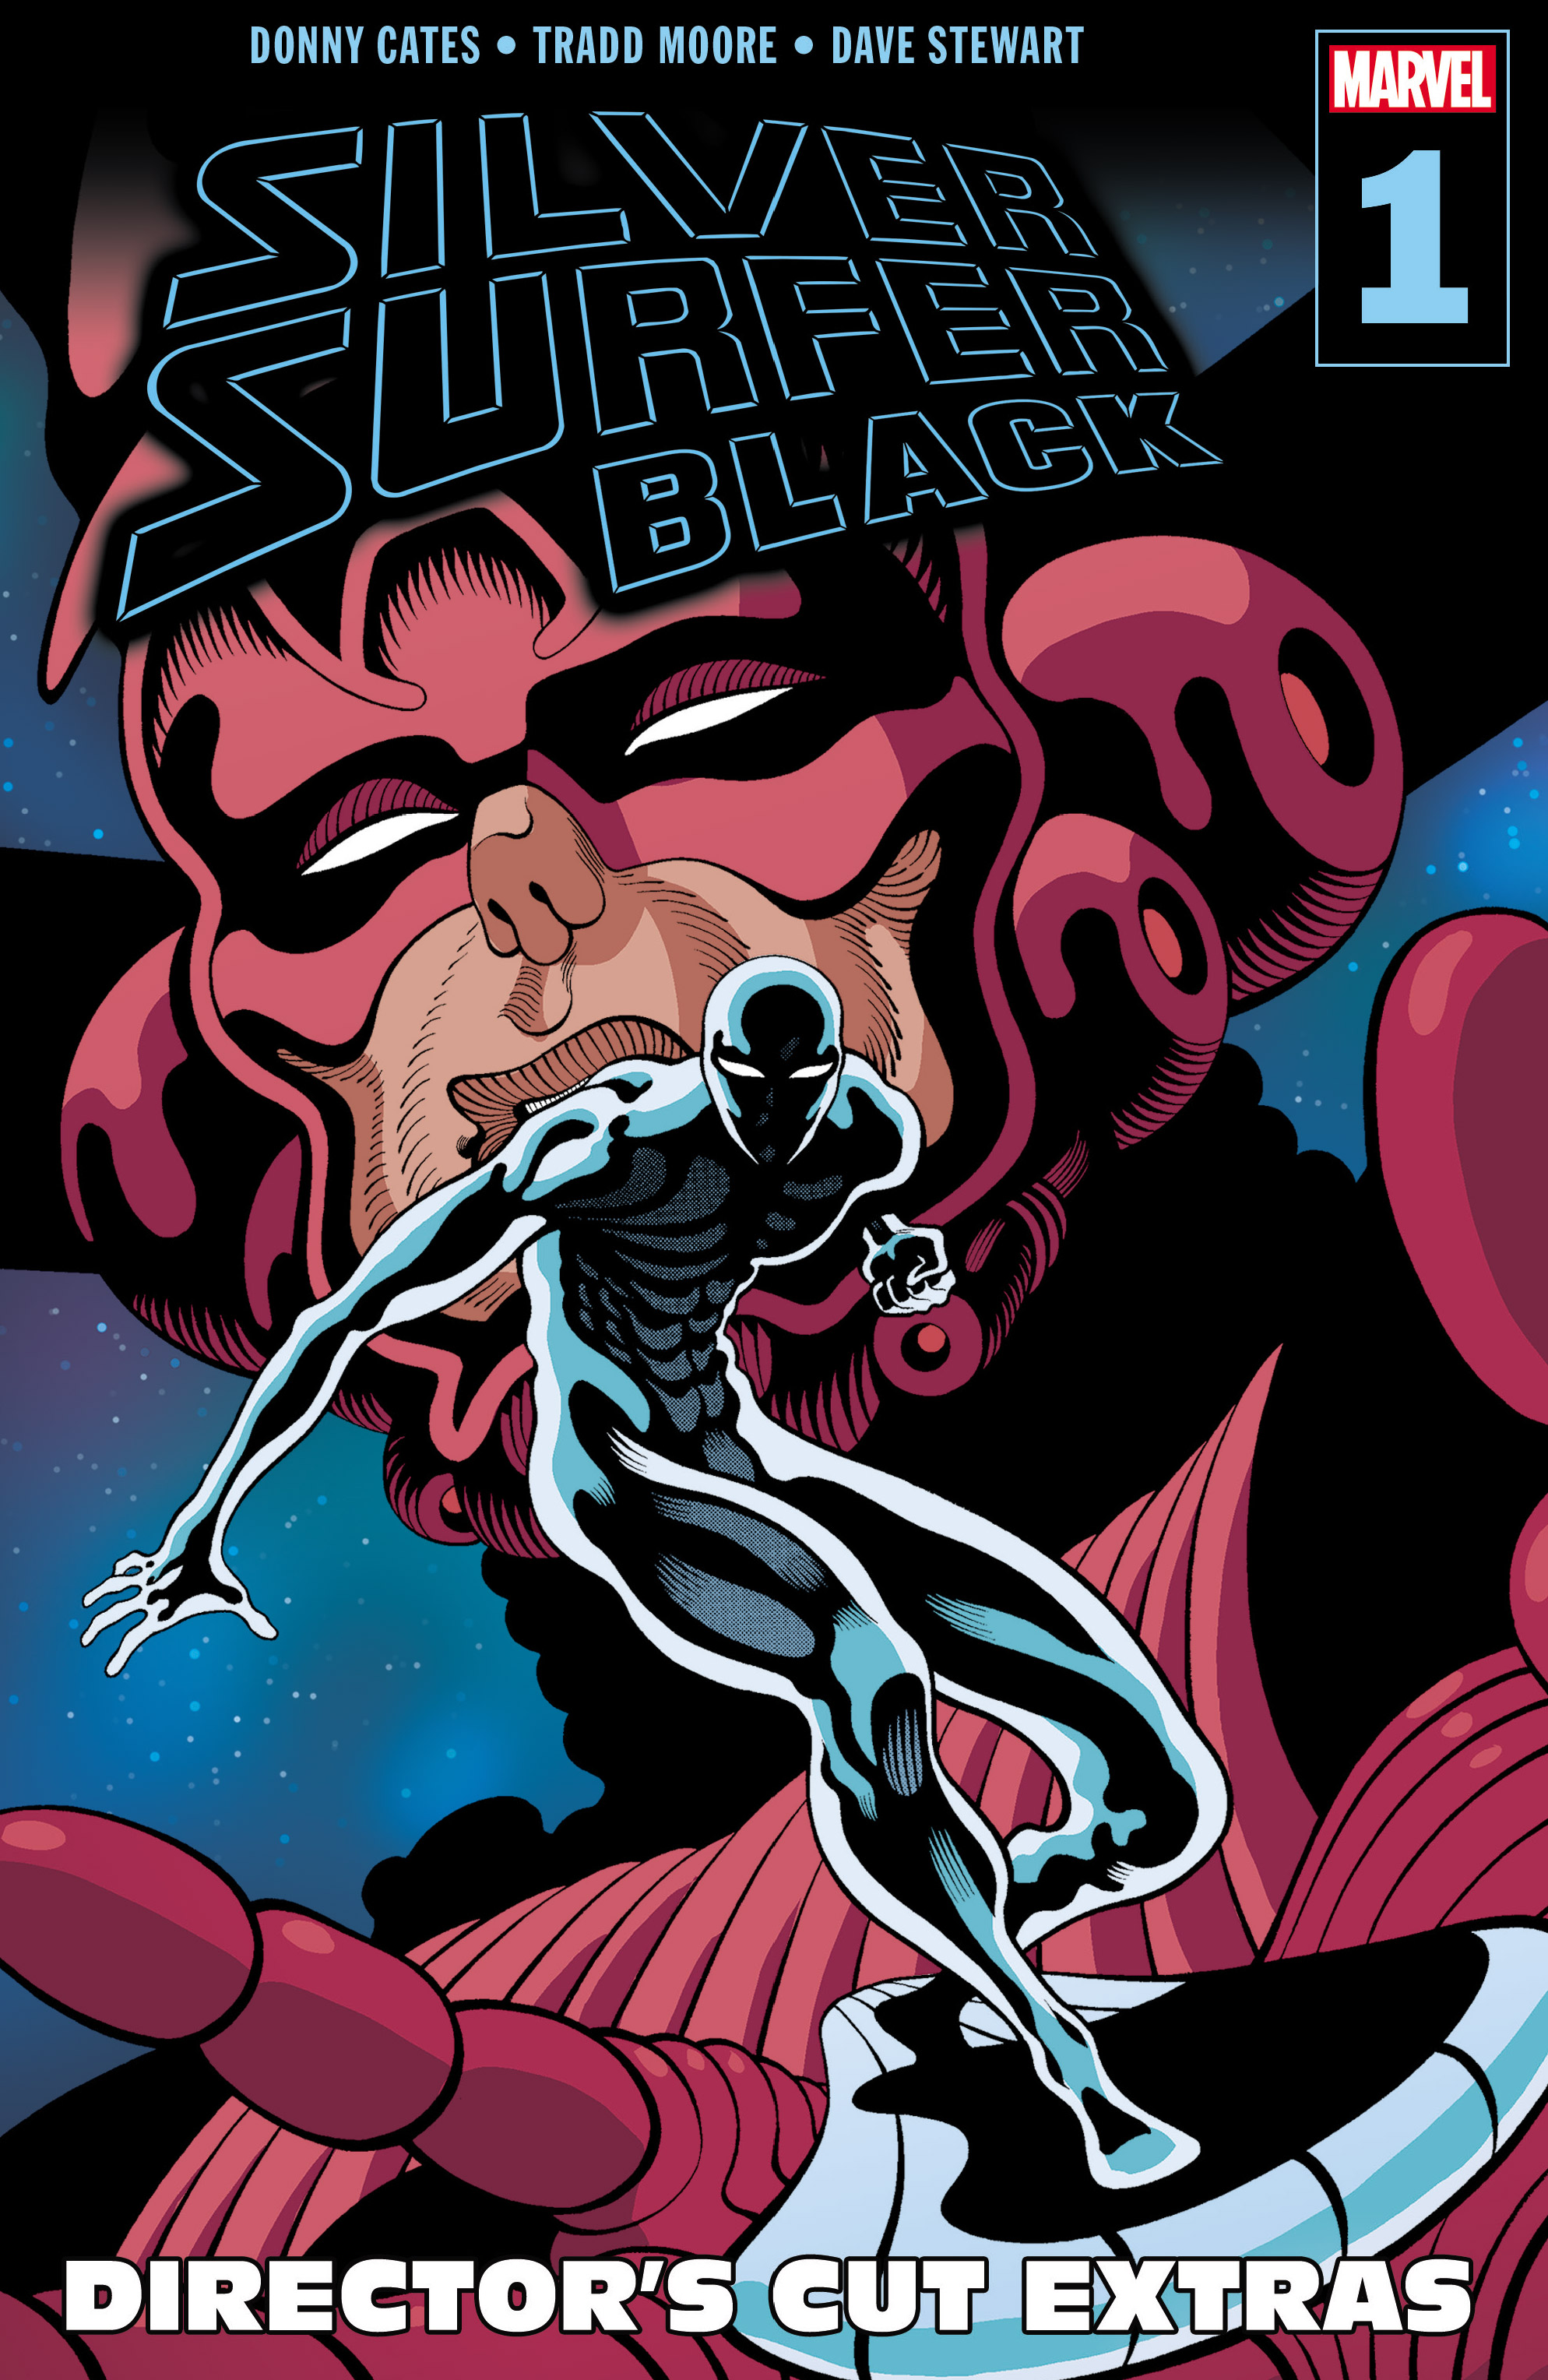 Read online Silver Surfer: Black comic -  Issue # _Director_s_Cut - 25